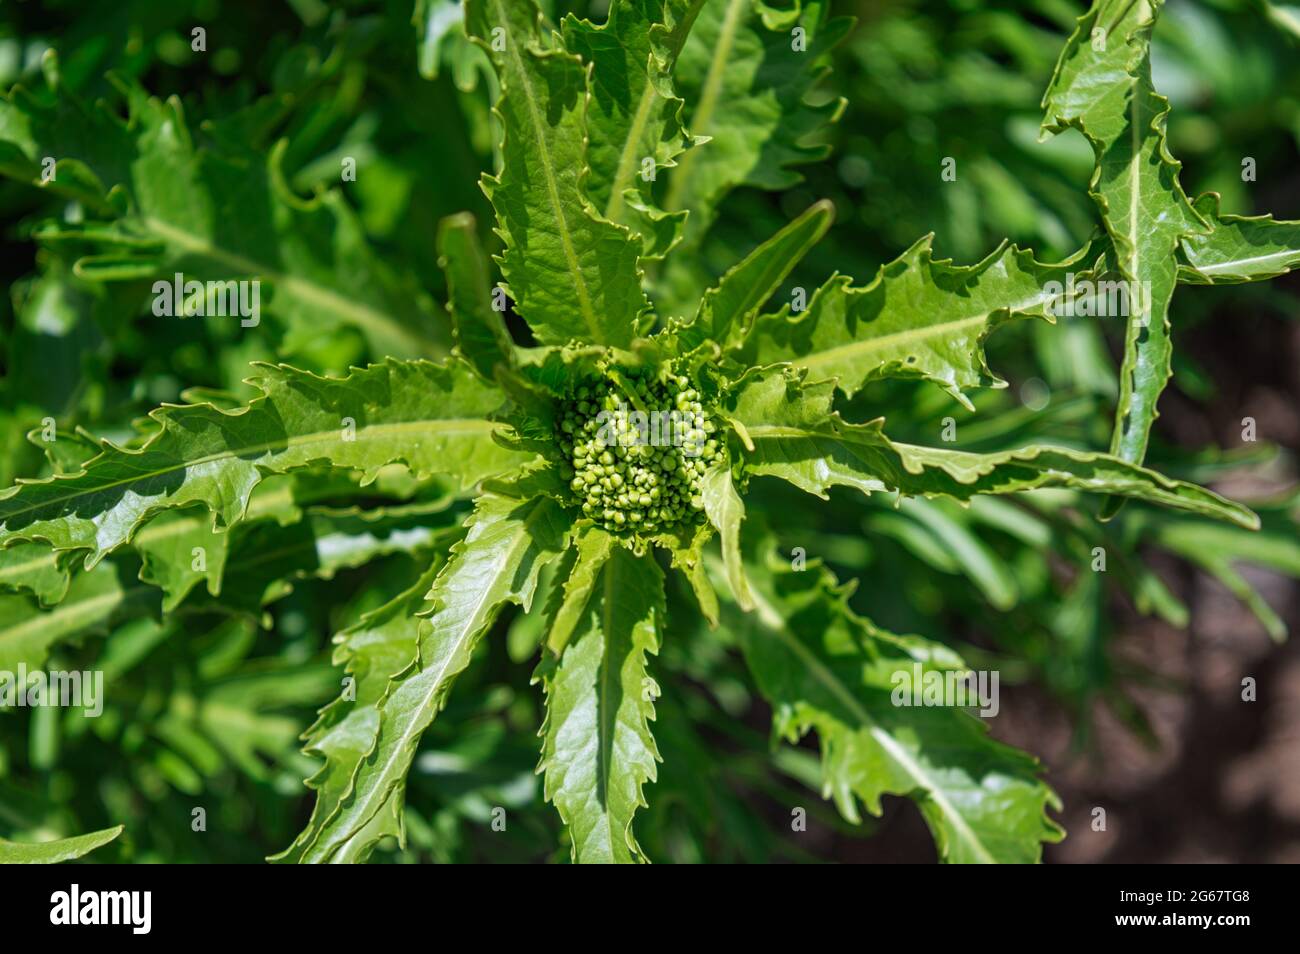 Closeup shot of bitter lettuce plant leaves on a blurred background Stock Photo